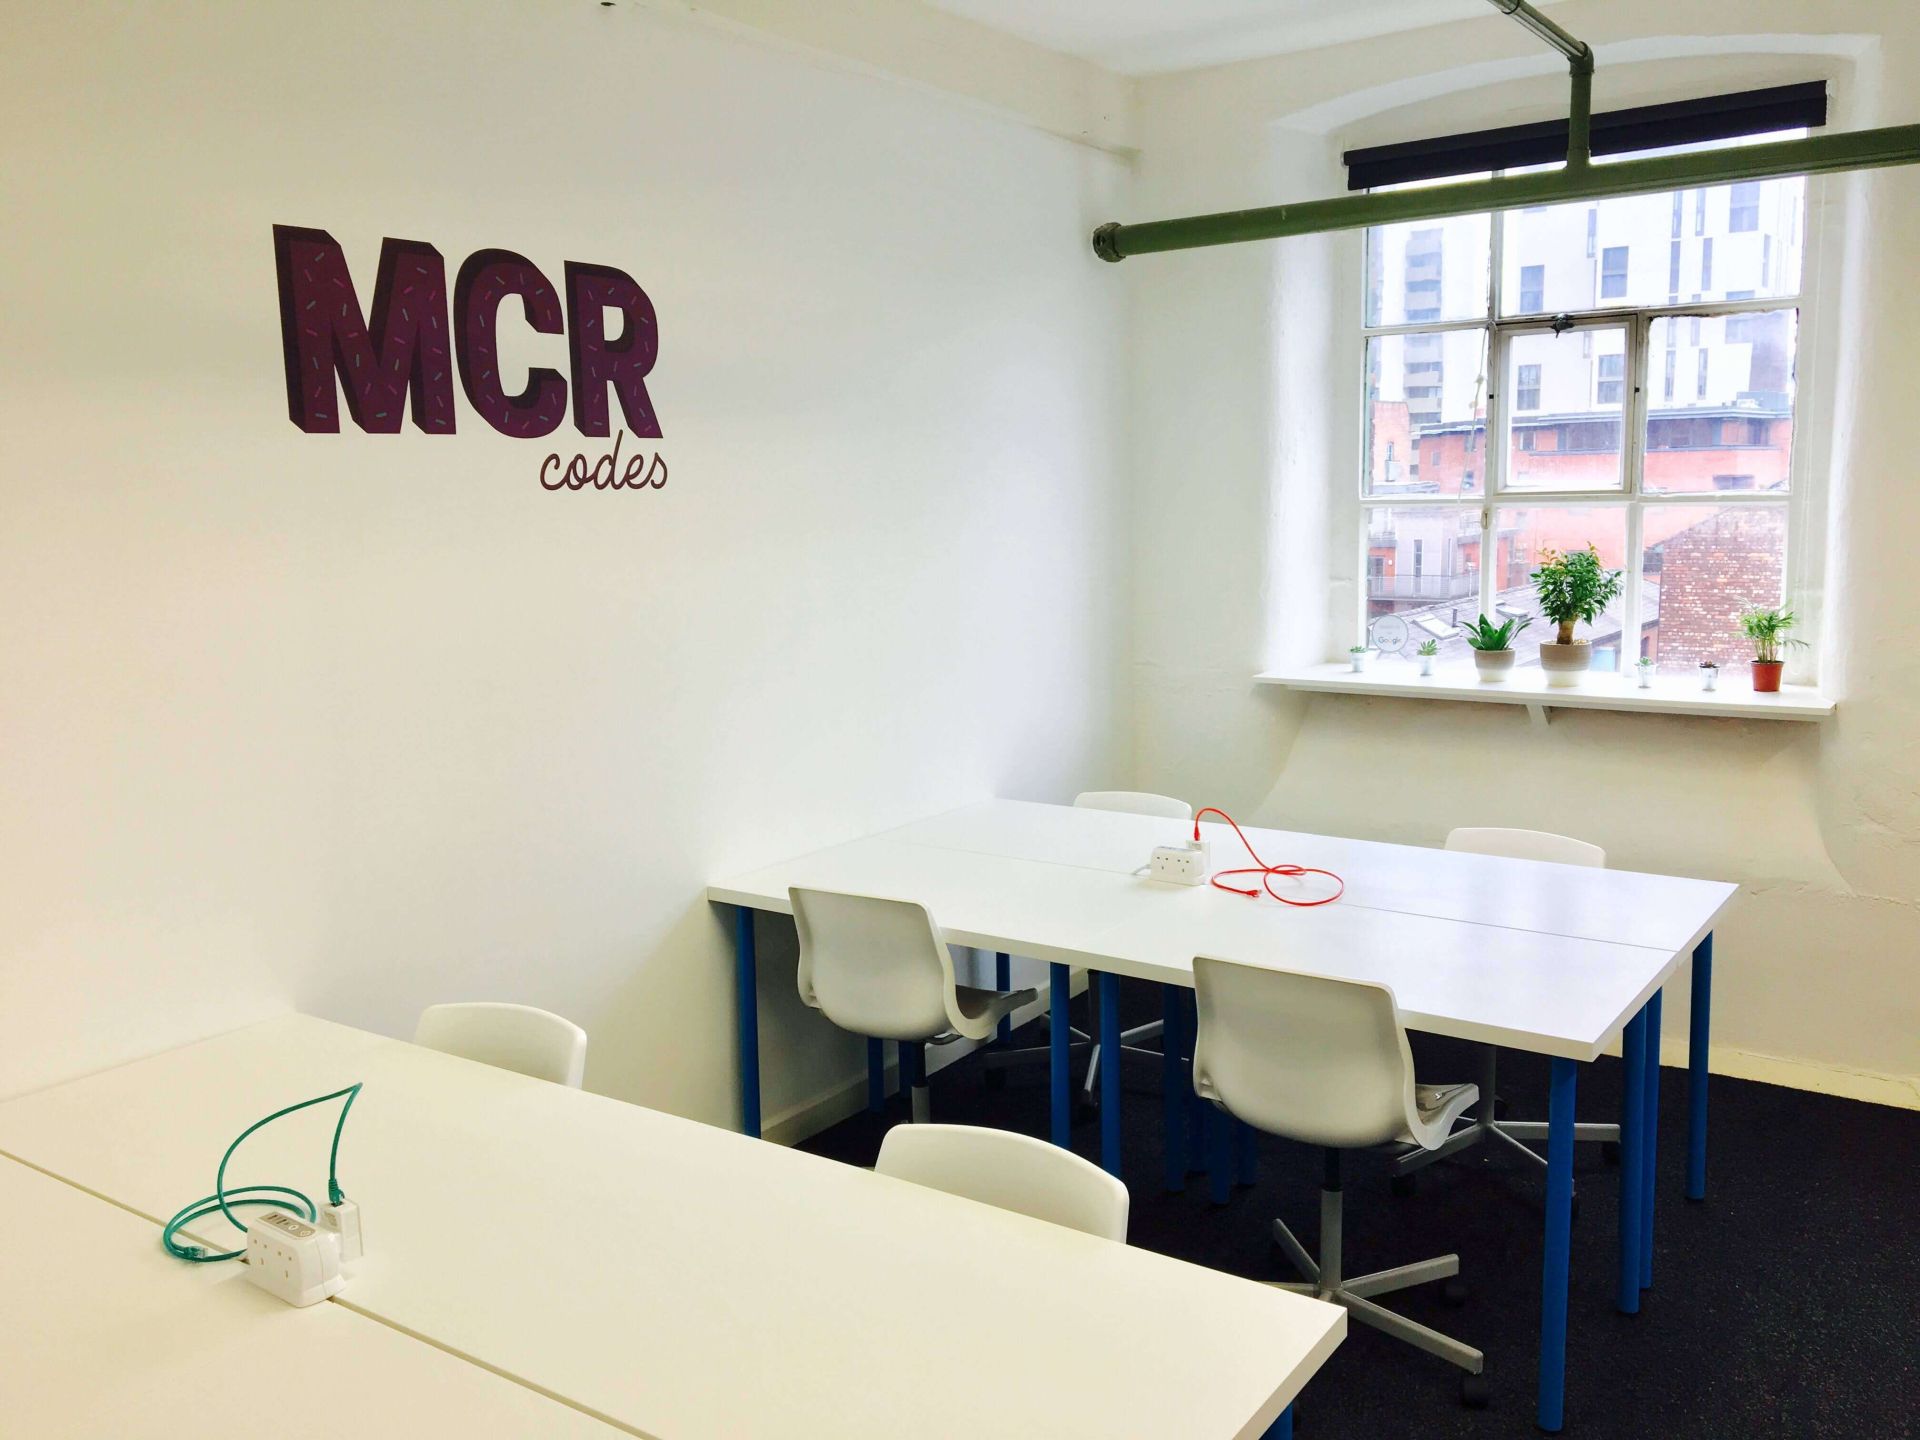 A picture of our first classroom as MCRcodes